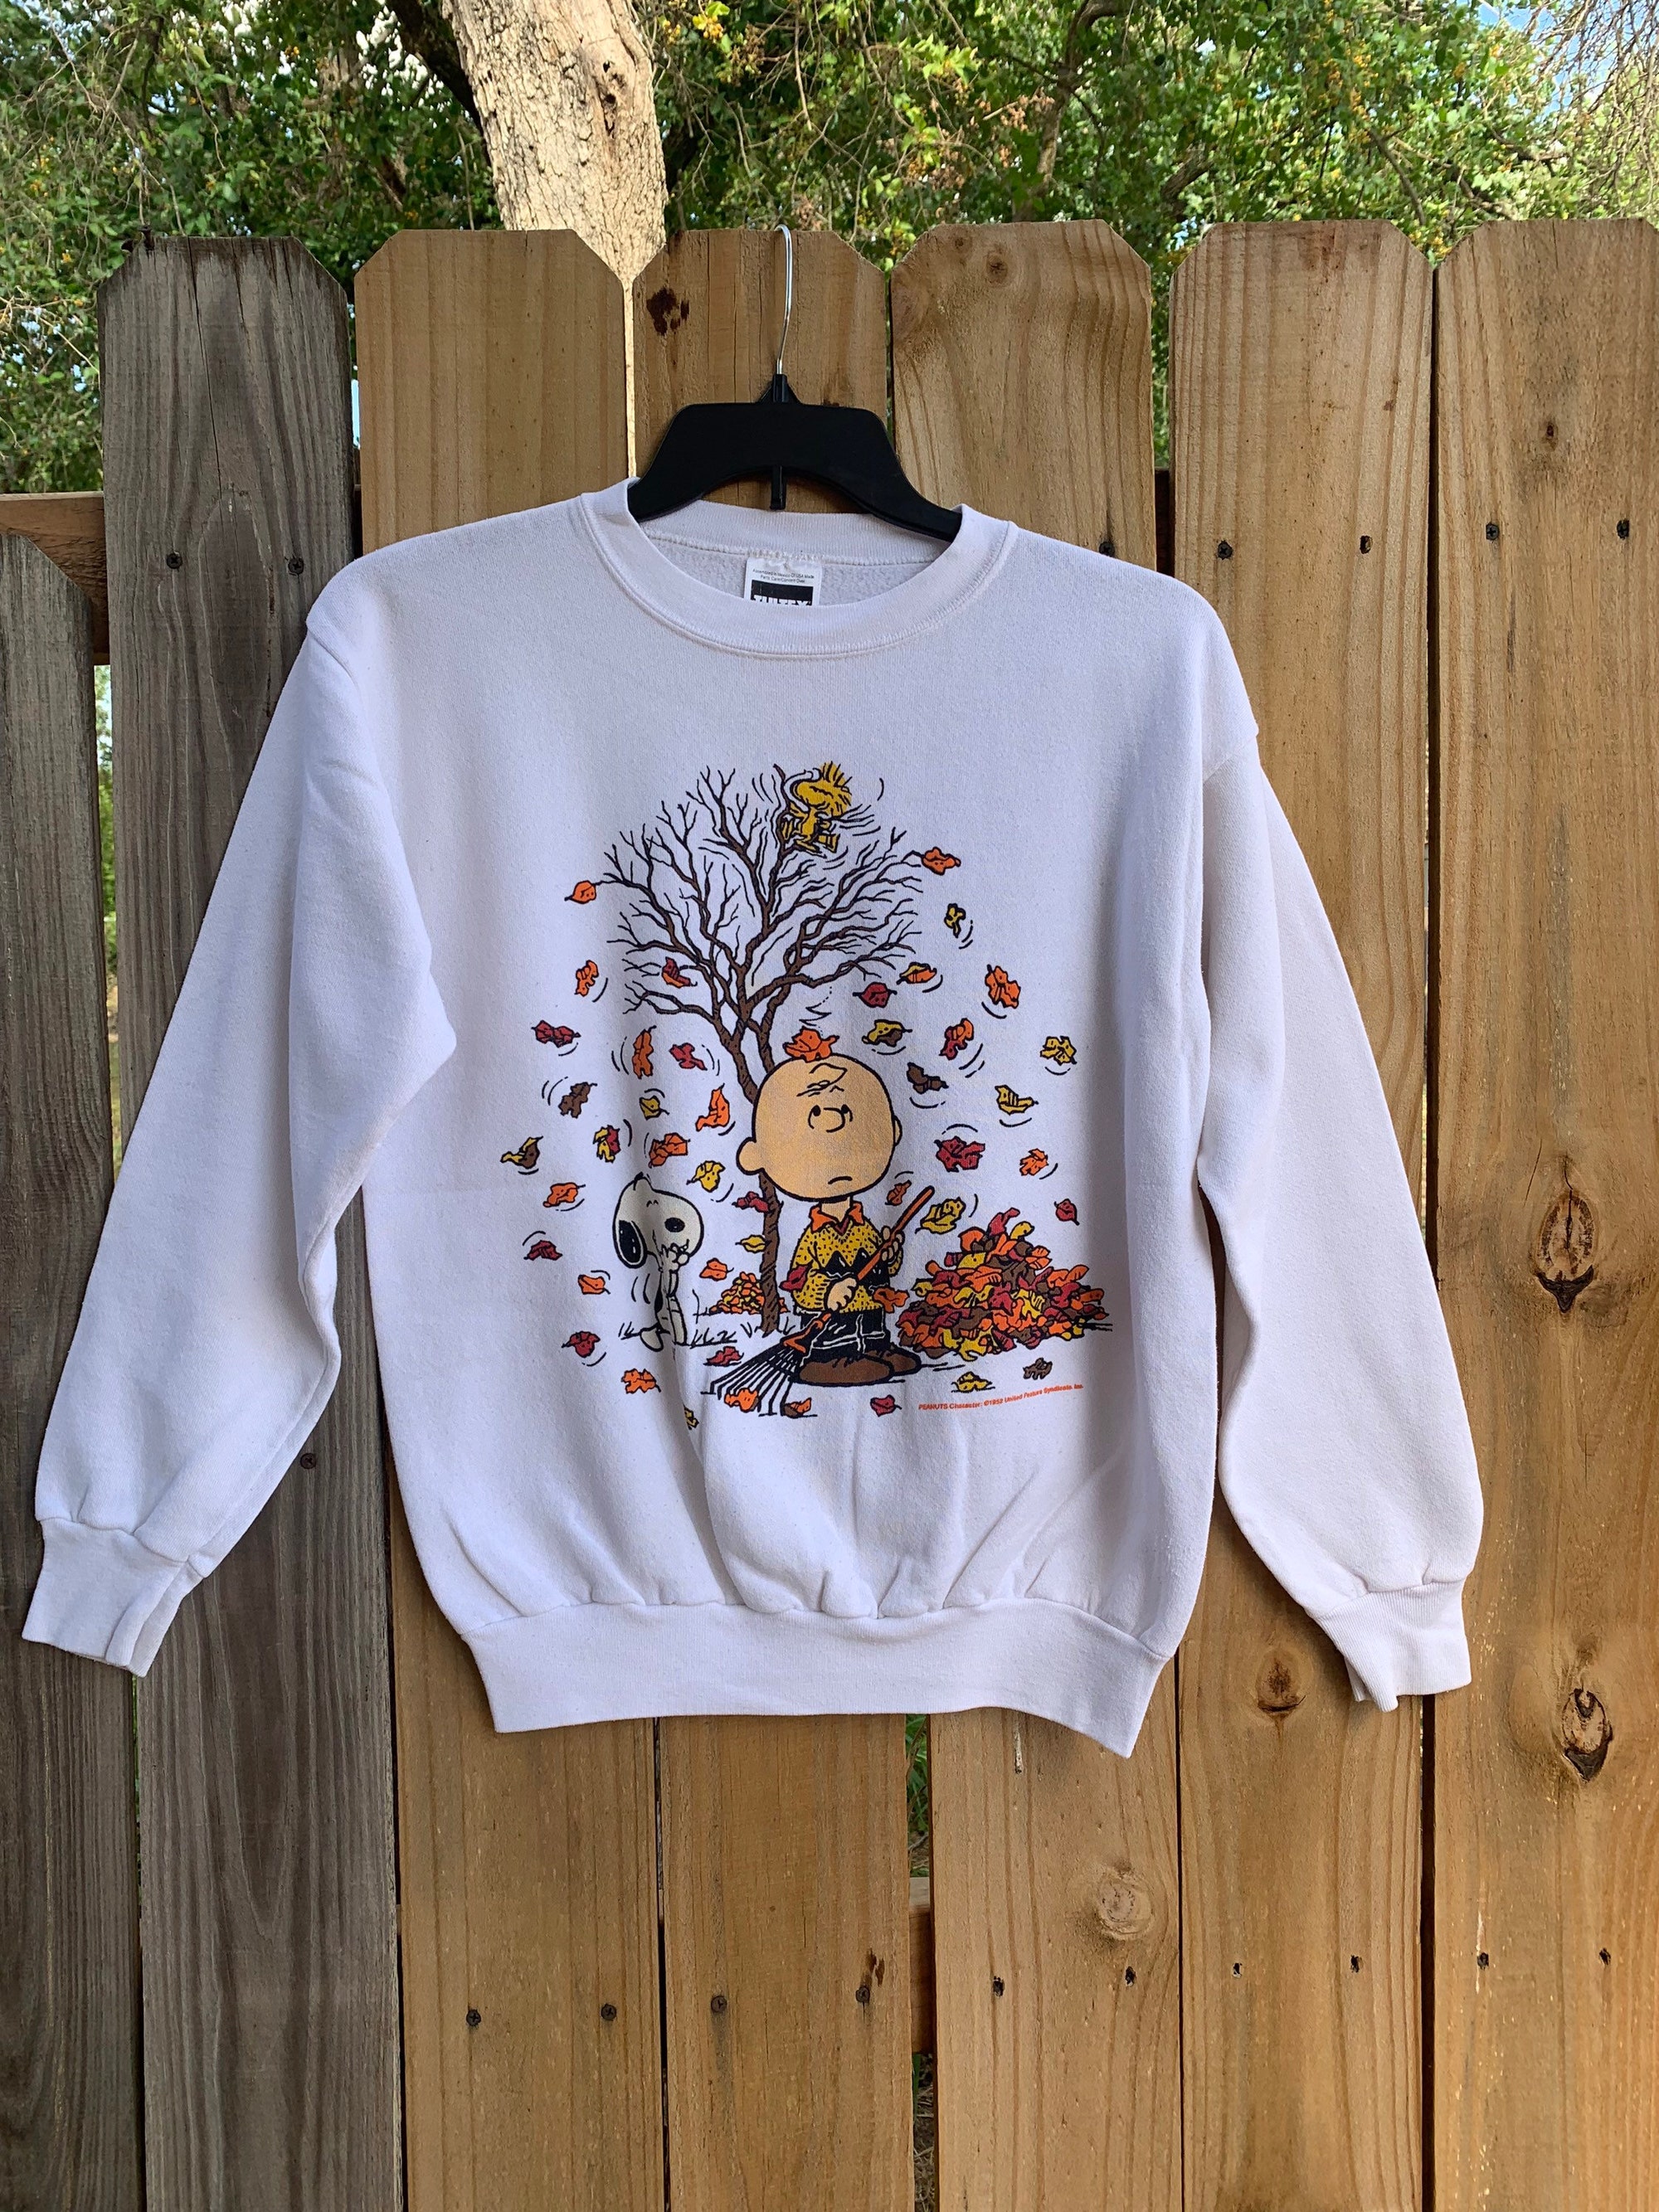 Discover Vintage 90er Peanuts Herbst Snoopy und Charlie Brown Pullover